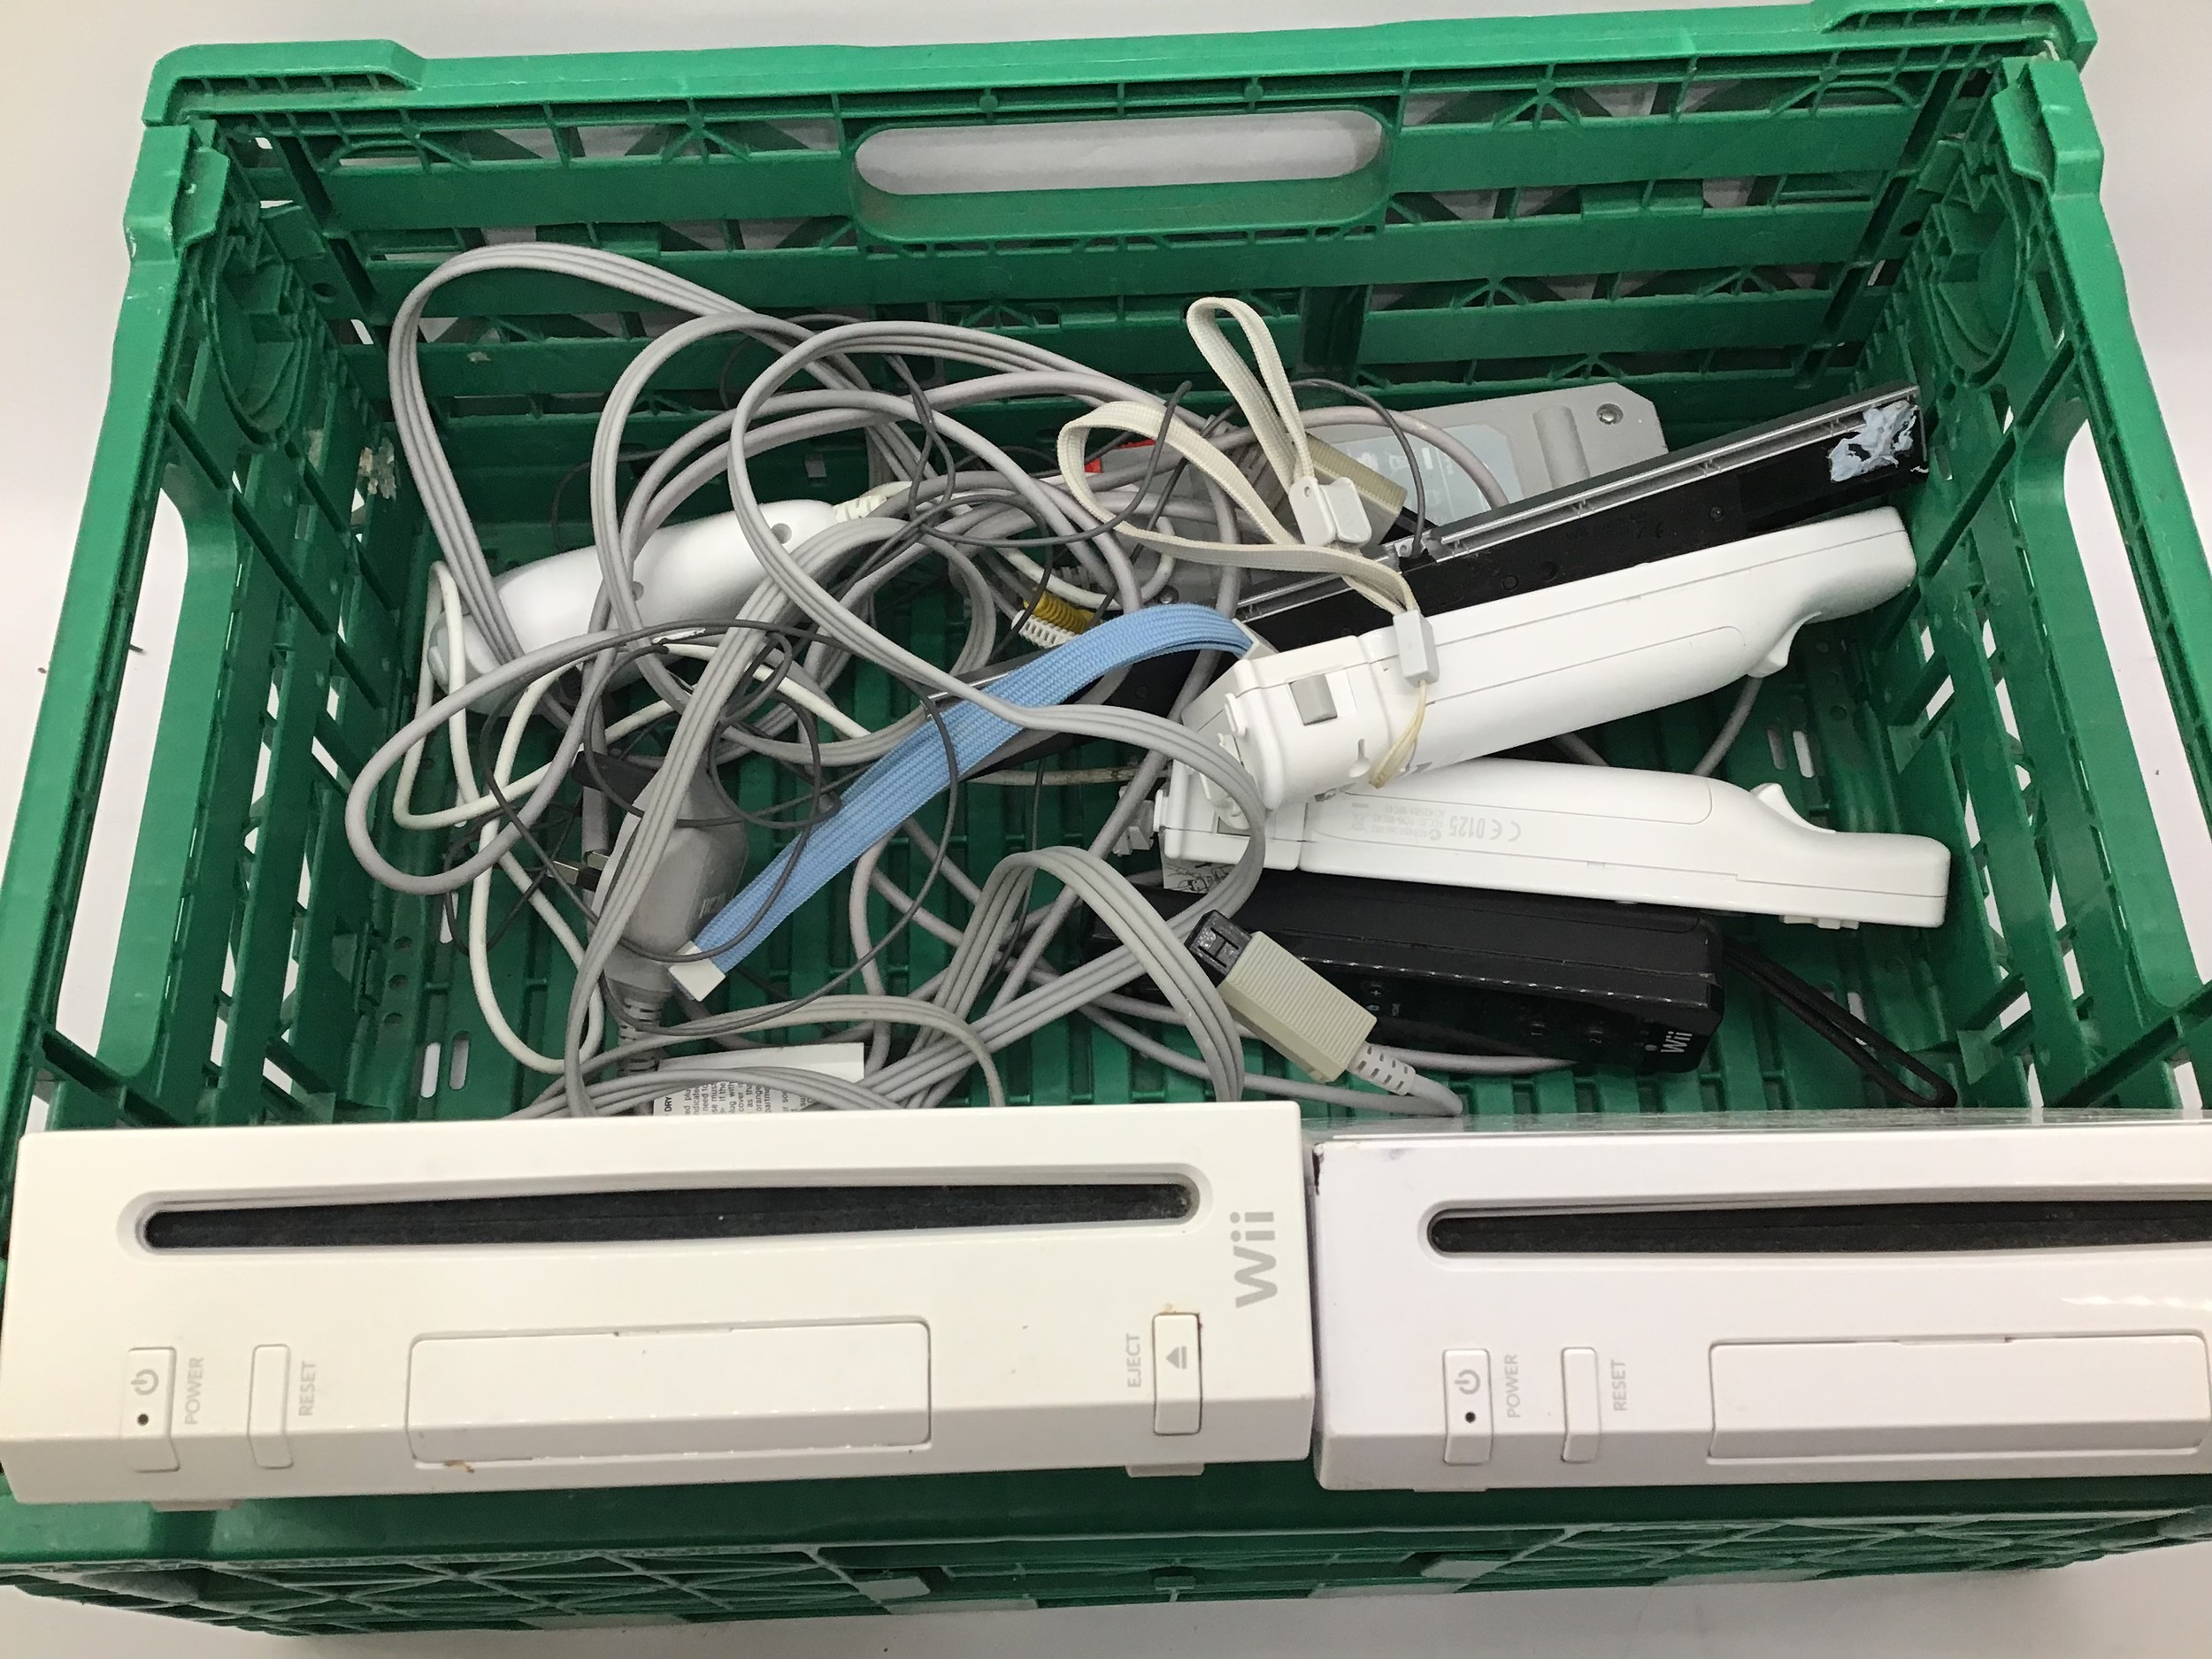 2 Wii units with controllers and leads.